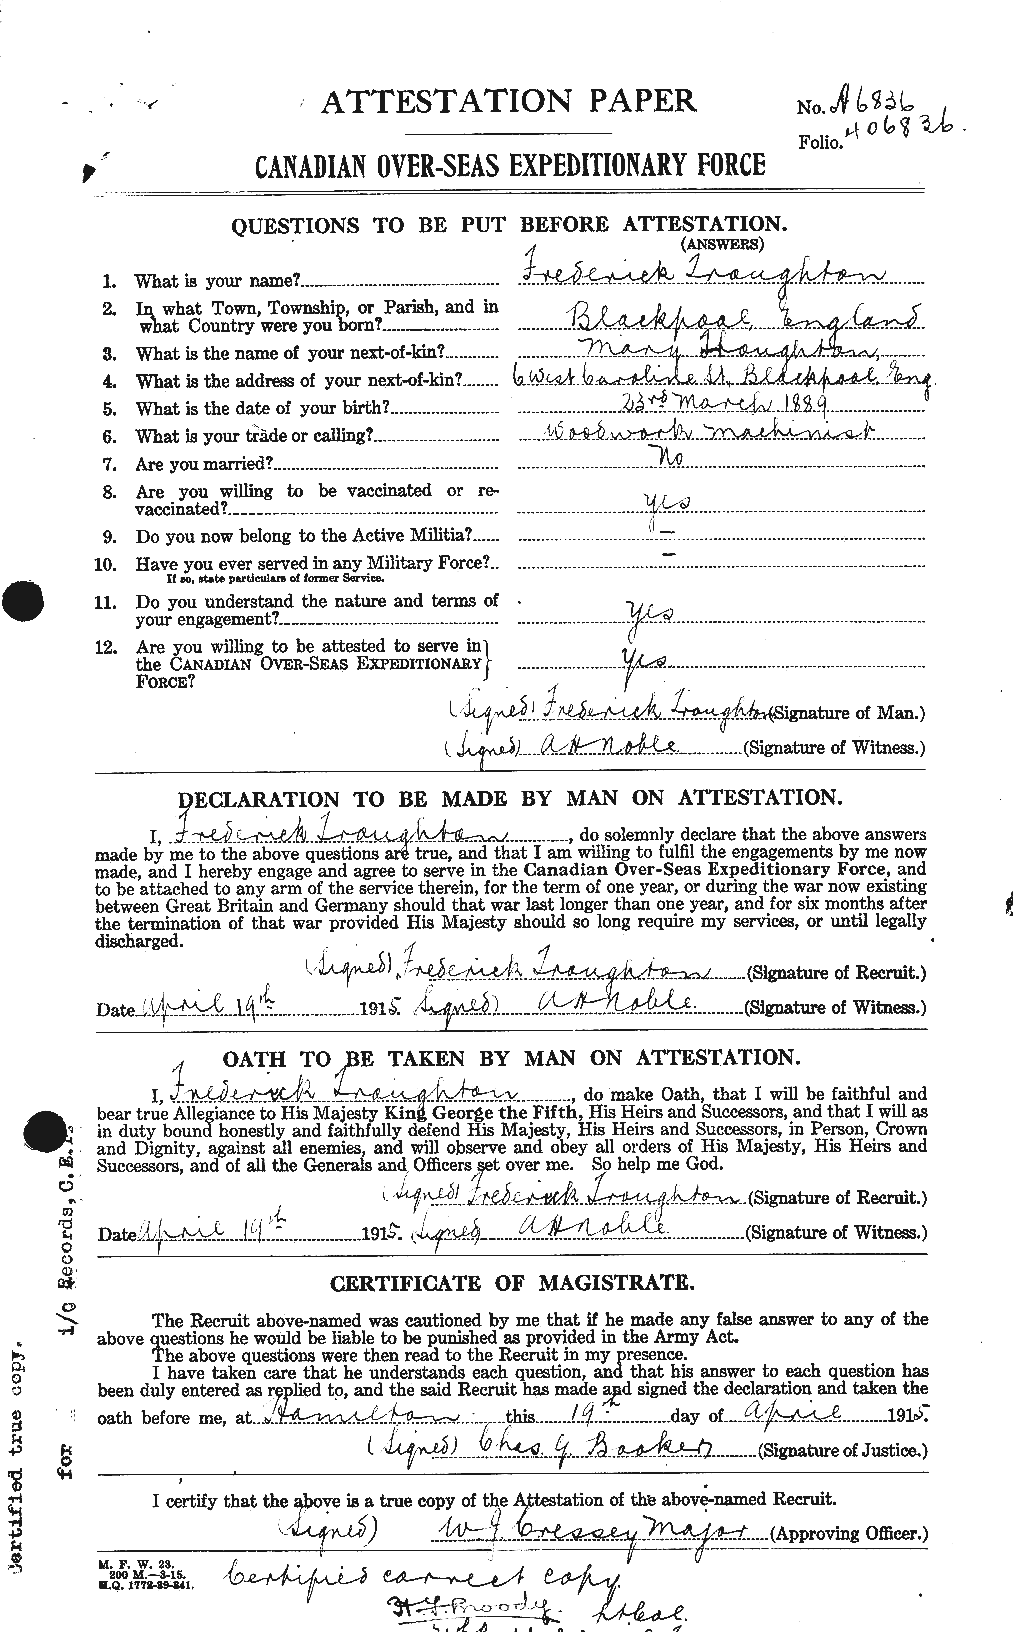 Personnel Records of the First World War - CEF 640437a